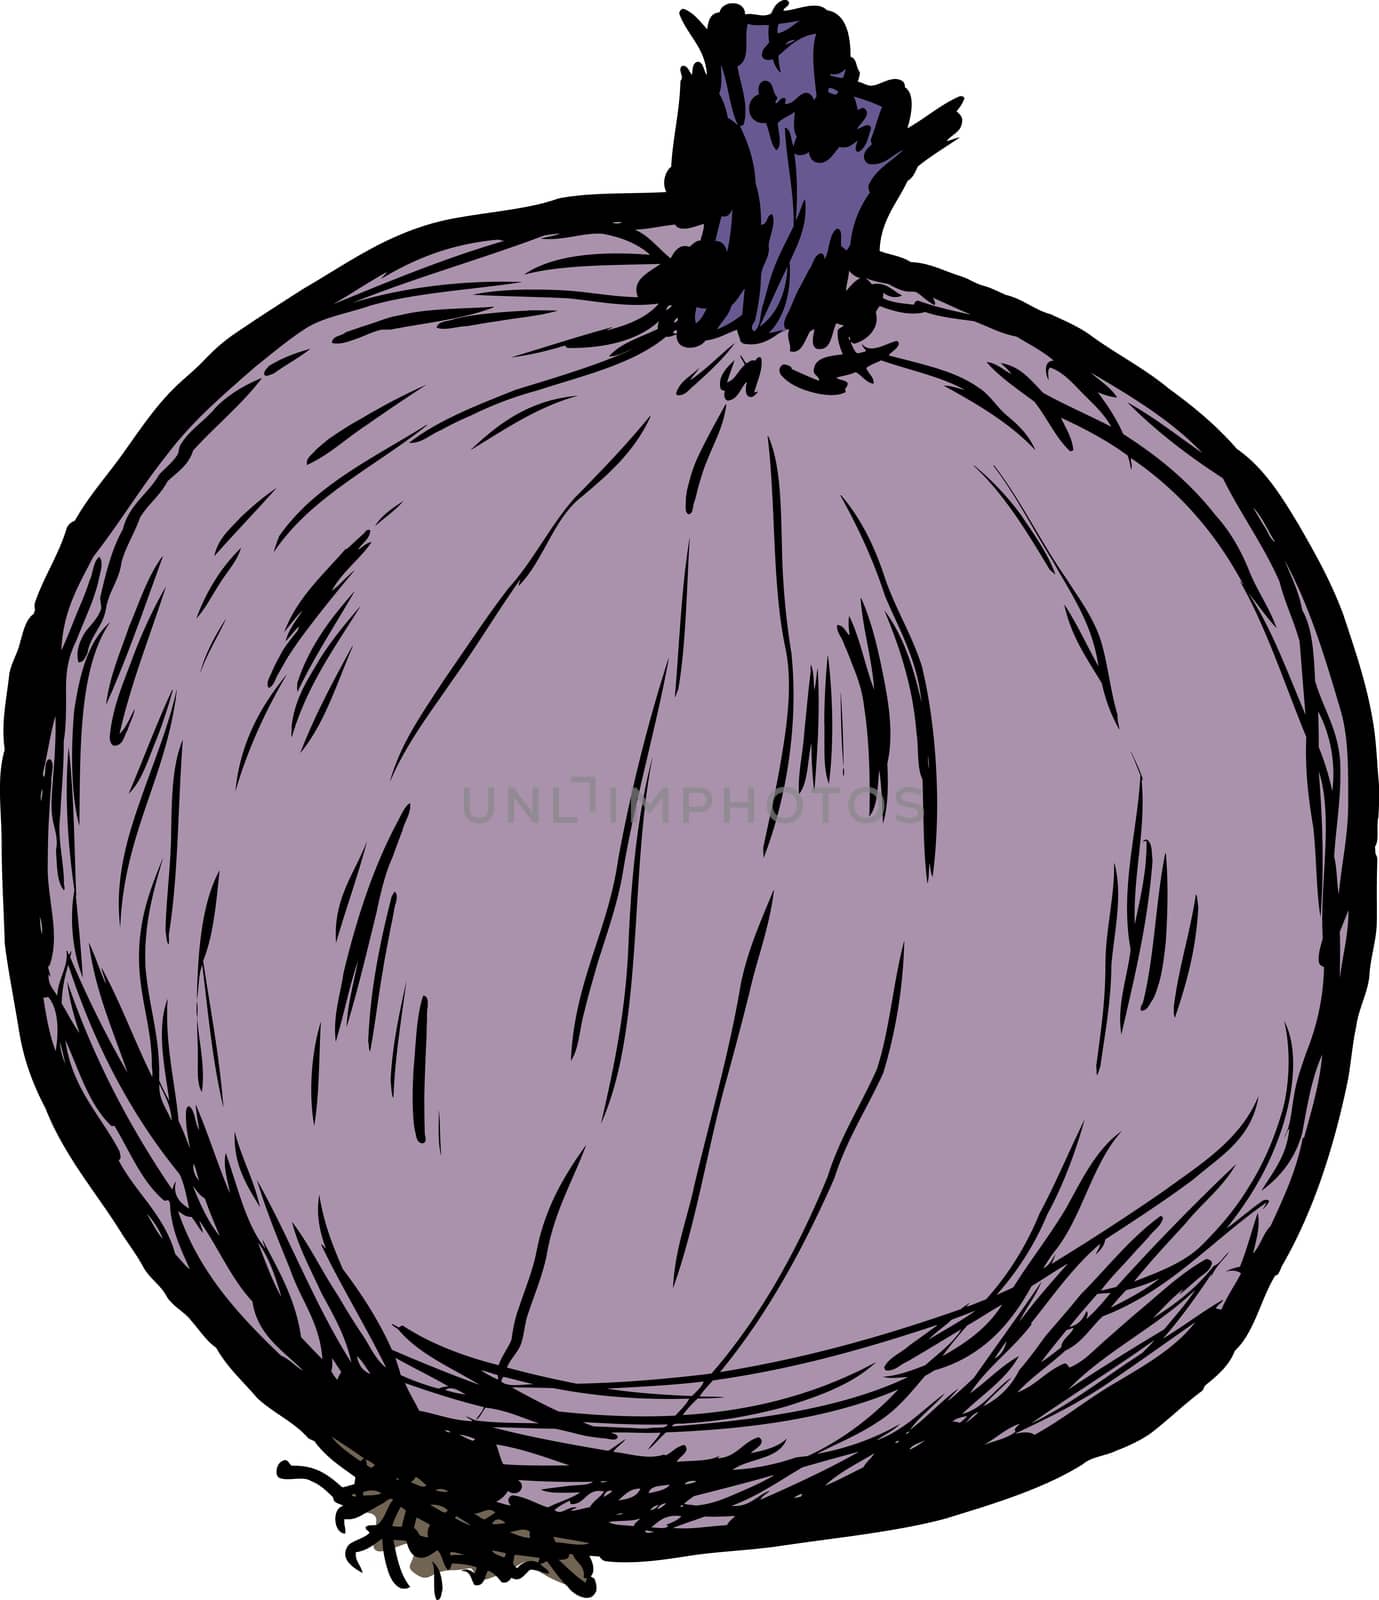 Whole raw red onion illustration by TheBlackRhino